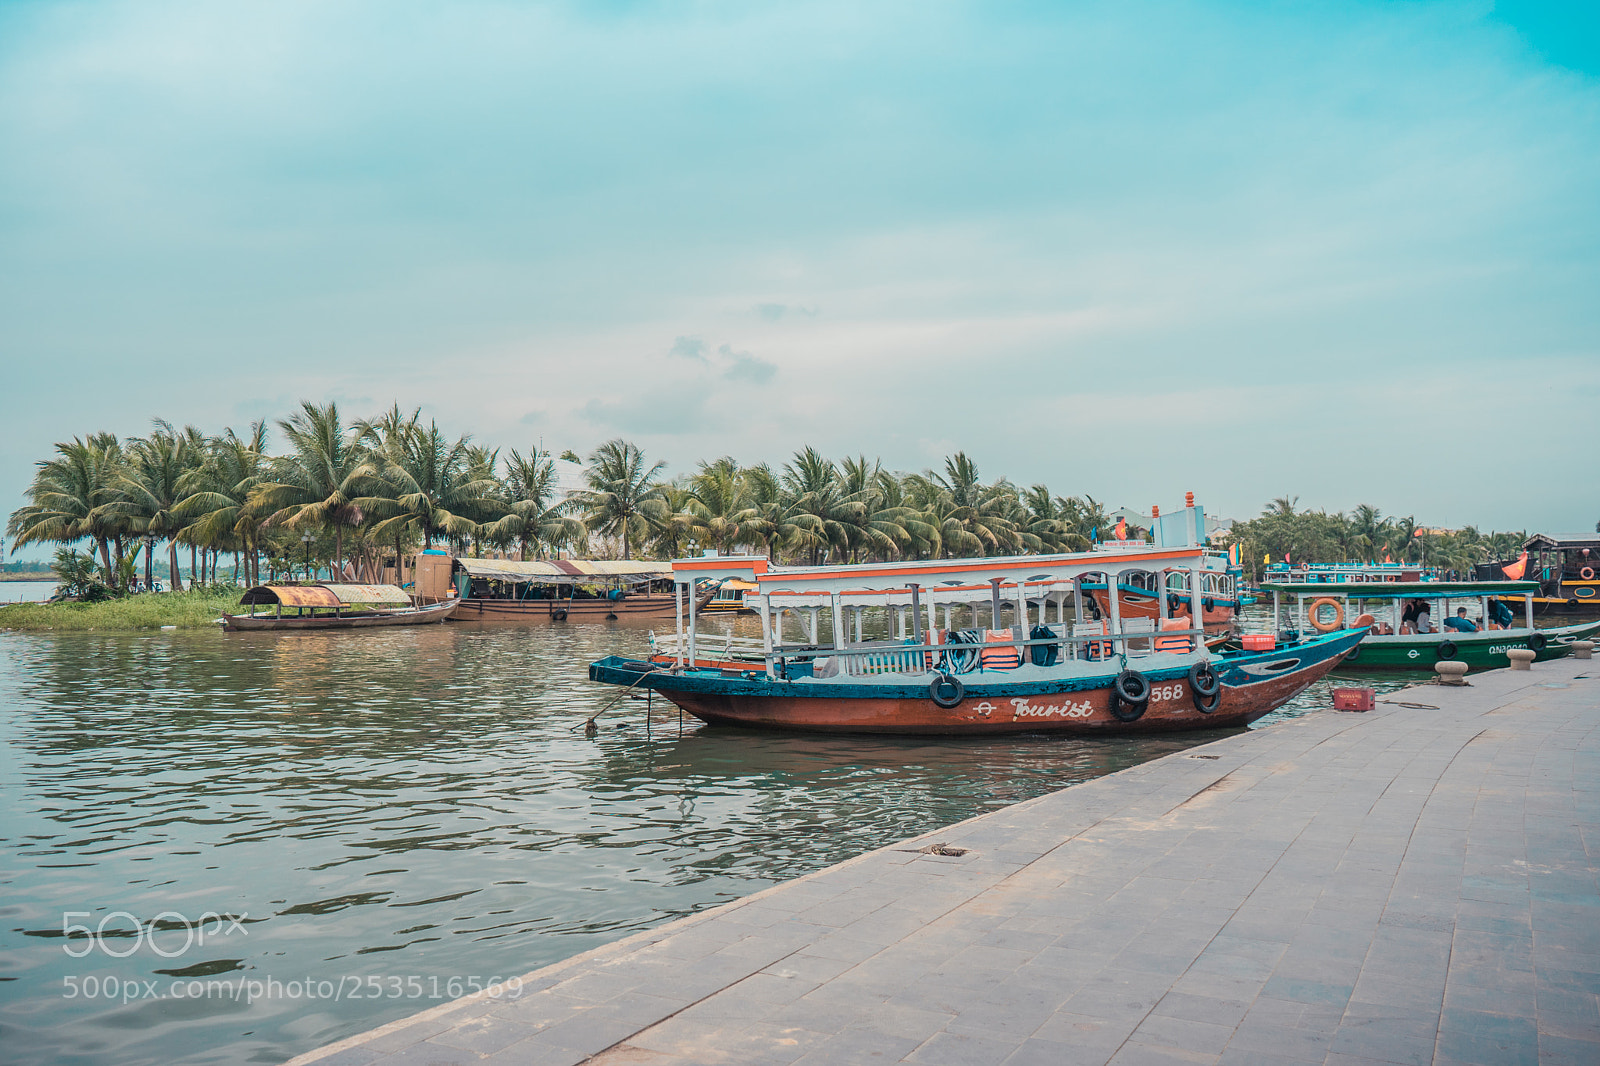 Sony a7 II sample photo. The boating in hoi photography